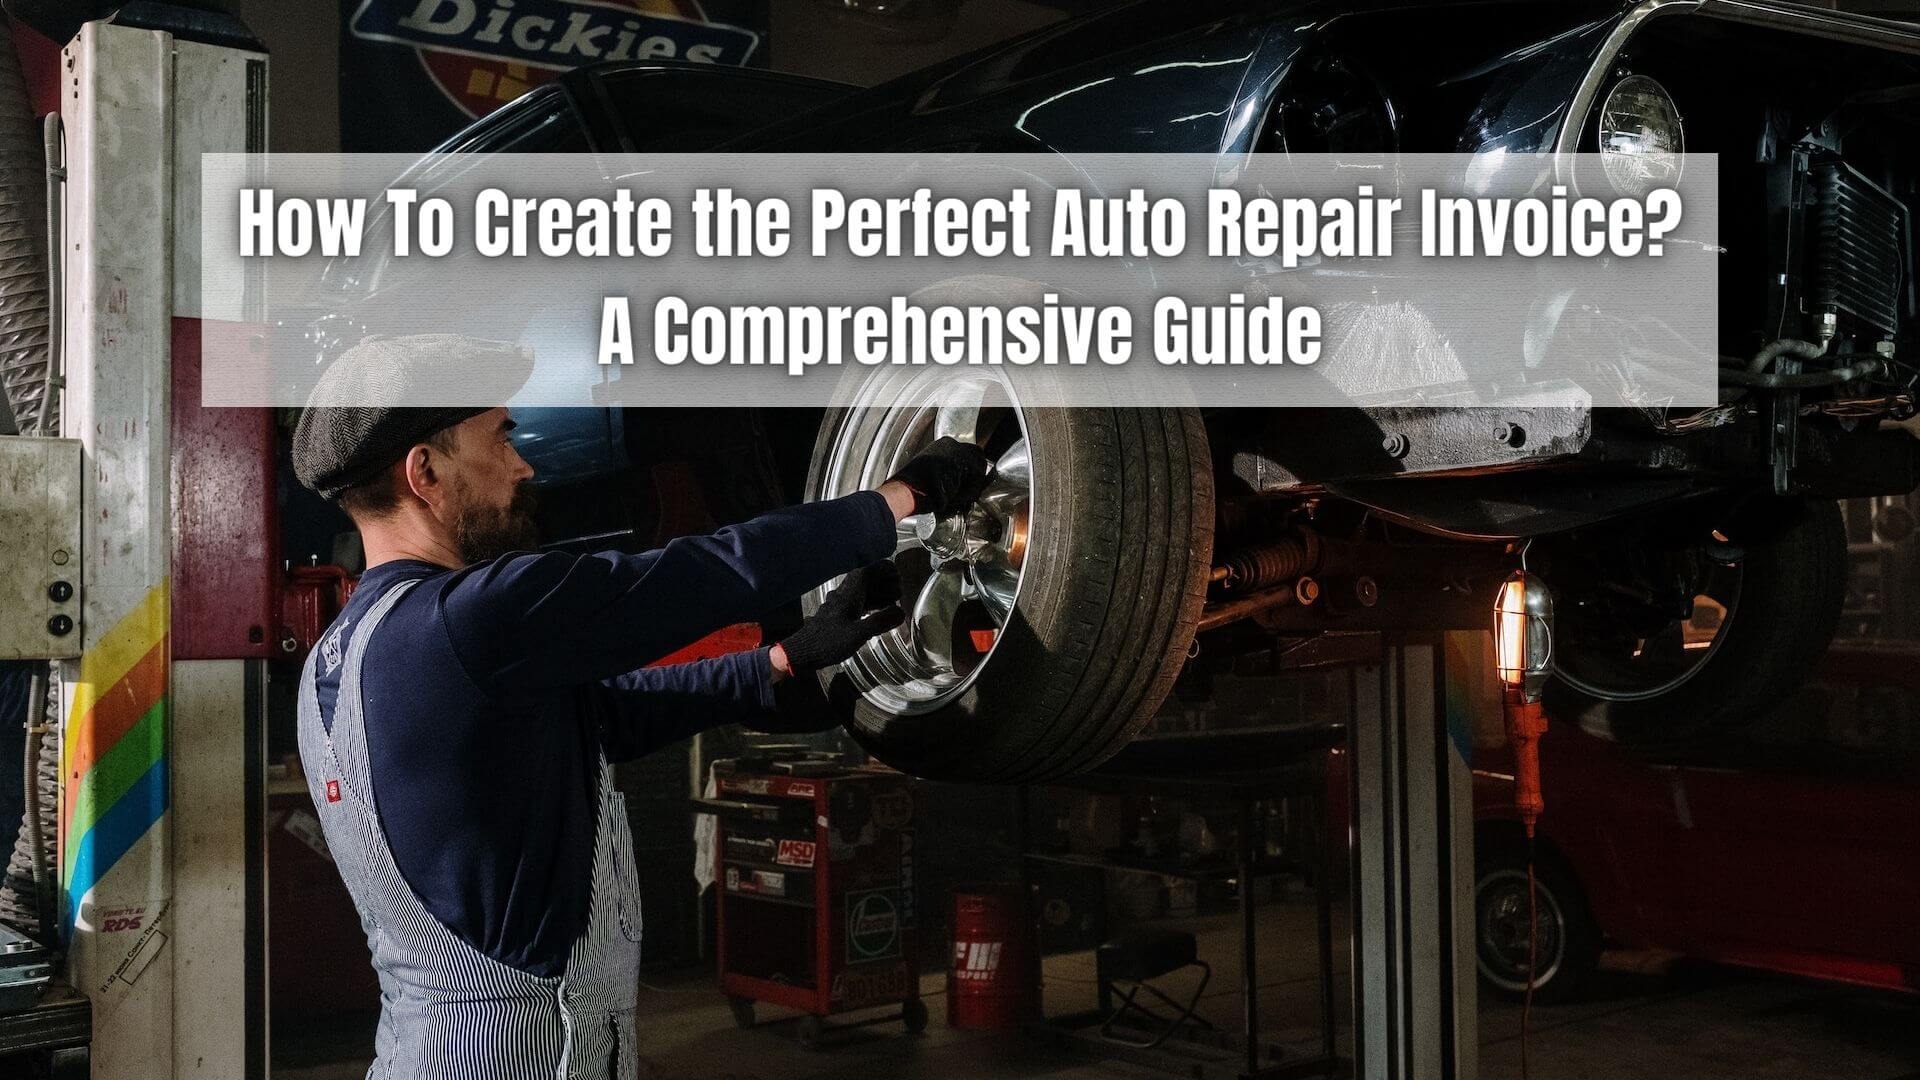 An auto repair invoice is a document detailing the services provided and the cost of those services. Here's what it is and how to create one!